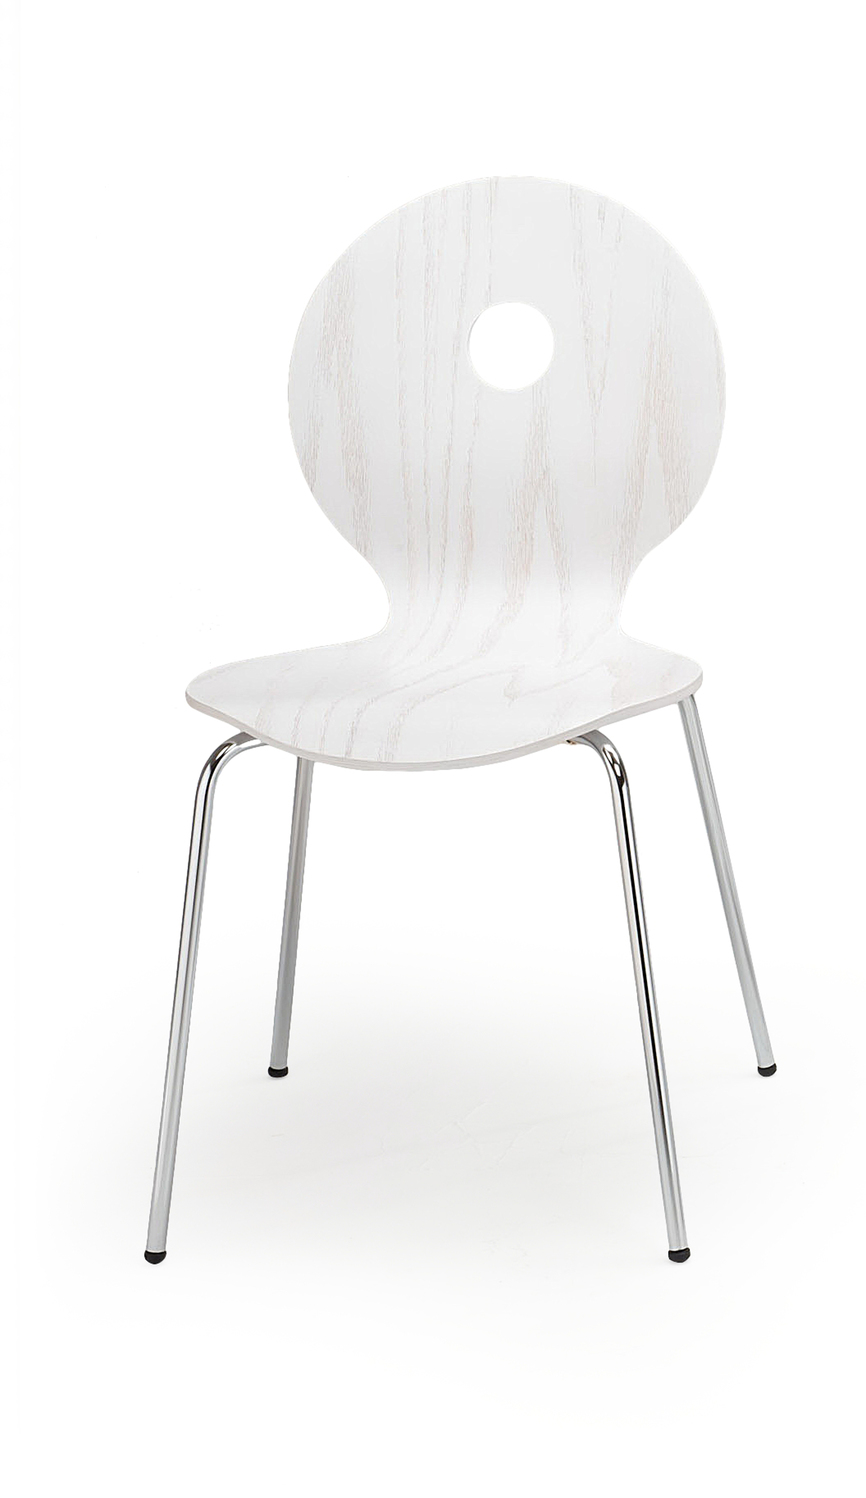 K233 chair, color: white